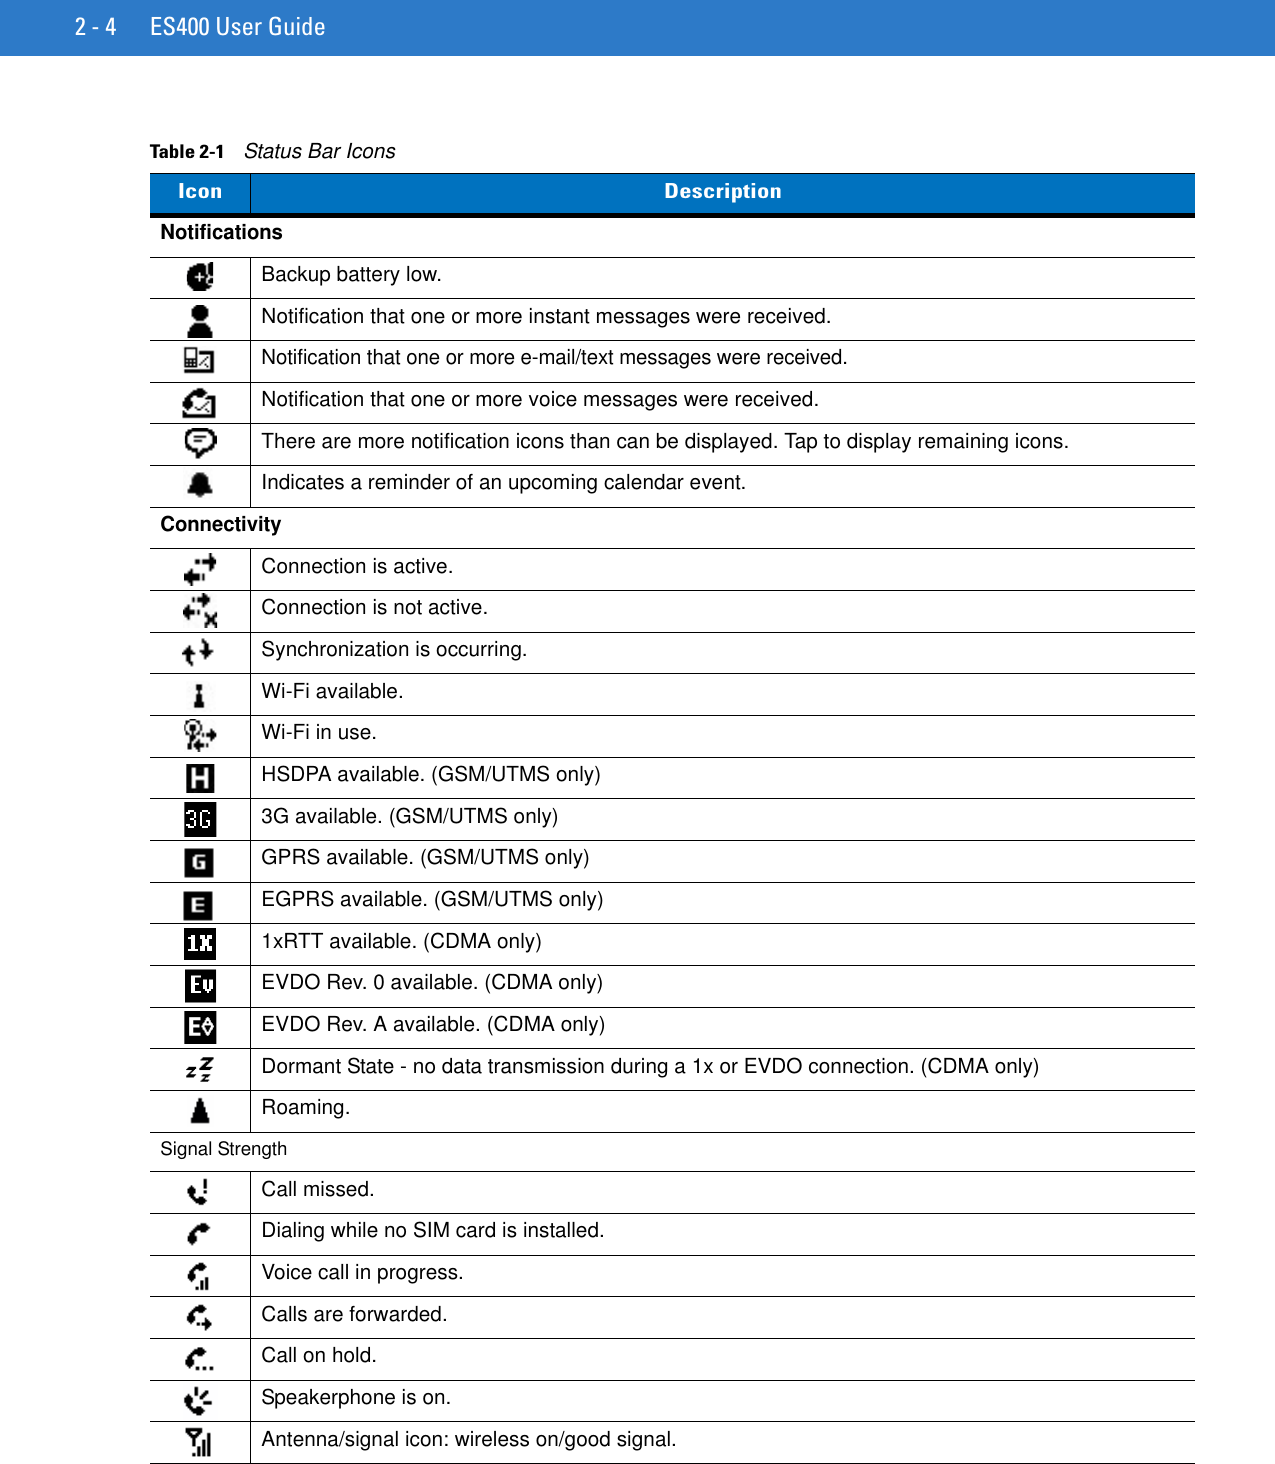 2 - 4 ES400 User GuideTable 2-1    Status Bar IconsIcon DescriptionNotificationsBackup battery low.Notification that one or more instant messages were received.Notification that one or more e-mail/text messages were received.Notification that one or more voice messages were received.There are more notification icons than can be displayed. Tap to display remaining icons.Indicates a reminder of an upcoming calendar event.ConnectivityConnection is active.Connection is not active.Synchronization is occurring.Wi-Fi available.Wi-Fi in use.HSDPA available. (GSM/UTMS only)3G available. (GSM/UTMS only)GPRS available. (GSM/UTMS only)EGPRS available. (GSM/UTMS only)1xRTT available. (CDMA only)EVDO Rev. 0 available. (CDMA only)EVDO Rev. A available. (CDMA only)Dormant State - no data transmission during a 1x or EVDO connection. (CDMA only)Roaming.Signal StrengthCall missed.Dialing while no SIM card is installed.Voice call in progress.Calls are forwarded.Call on hold.Speakerphone is on.Antenna/signal icon: wireless on/good signal.